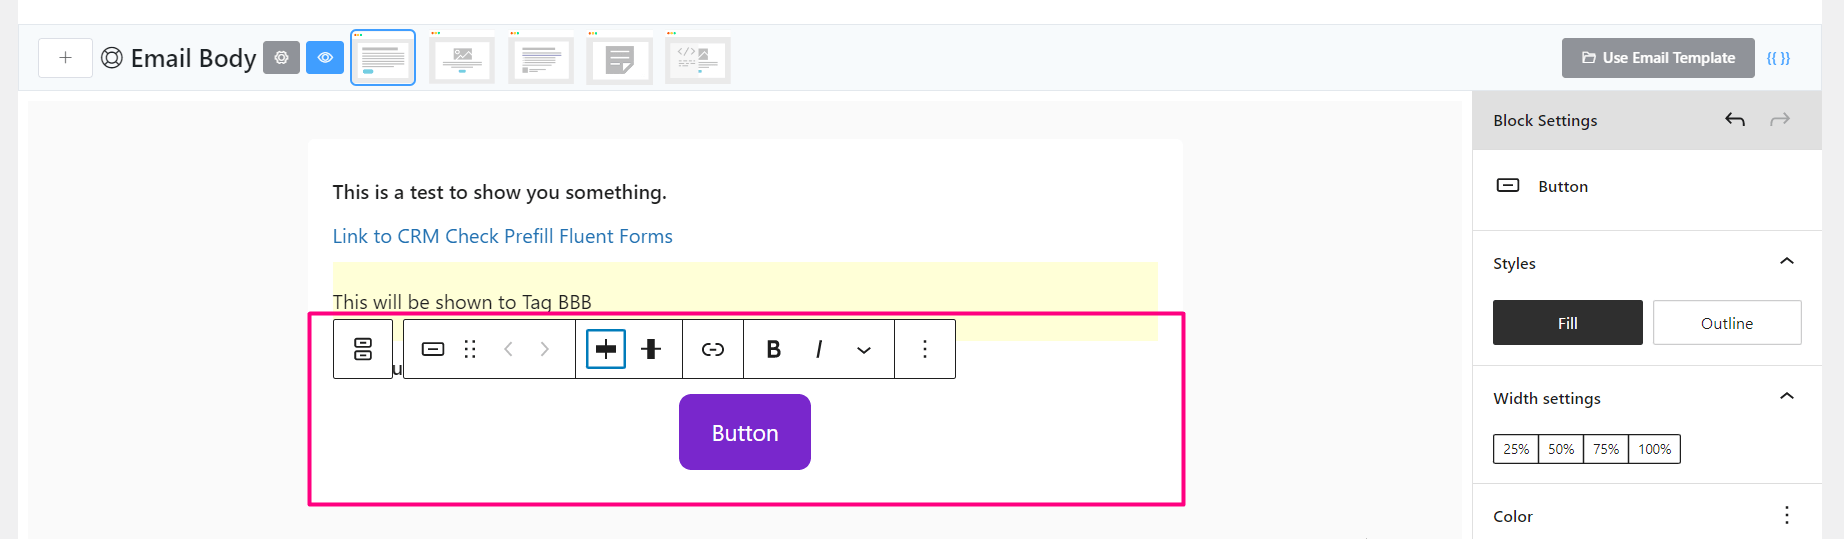 crm email editor button